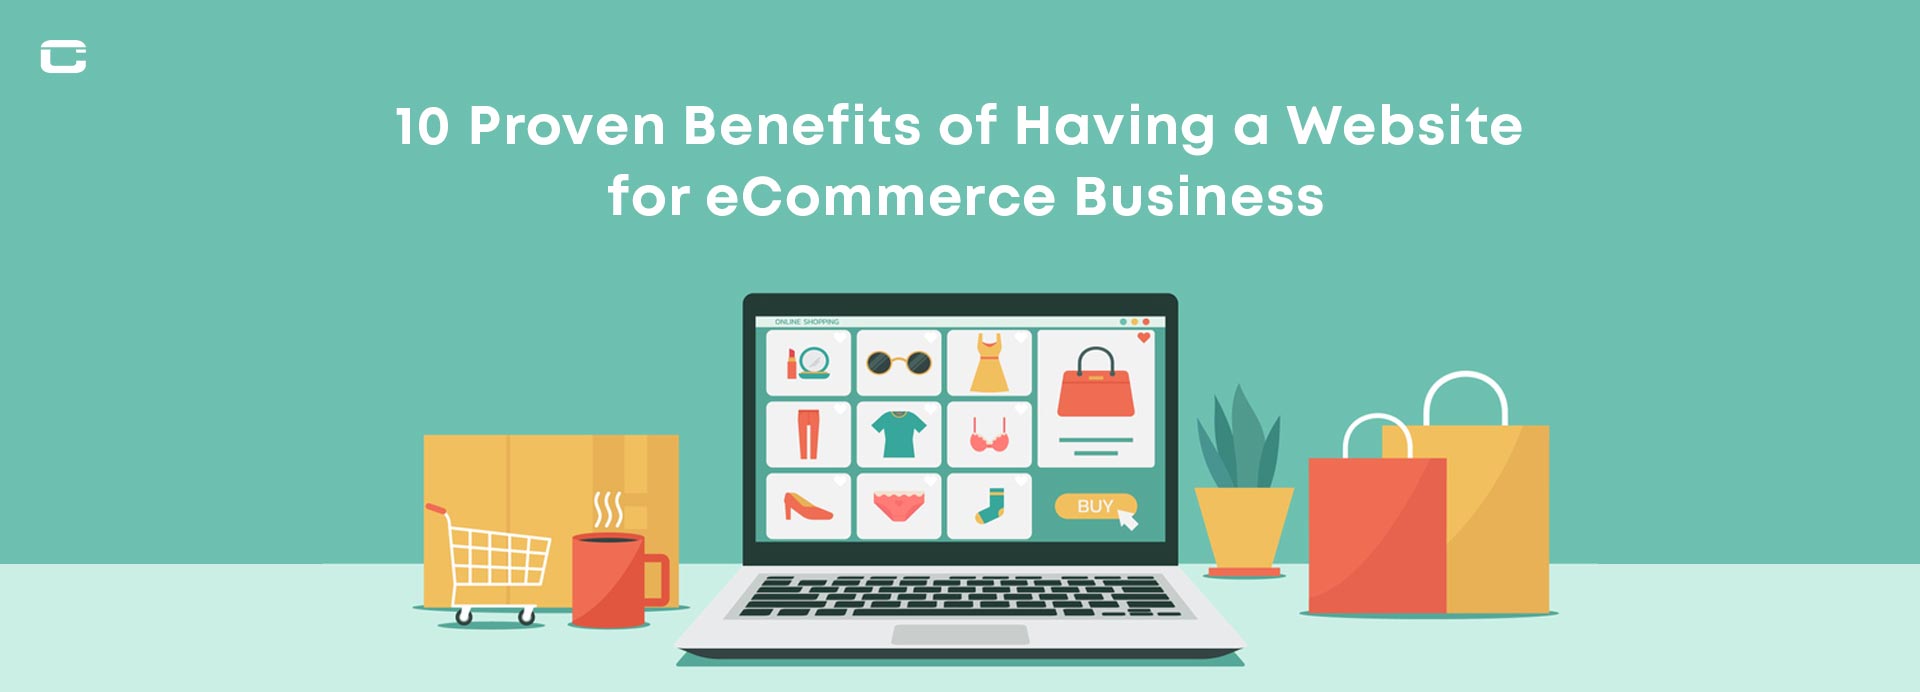 10 Proven Benefits of Having a Website for eCommerce Business